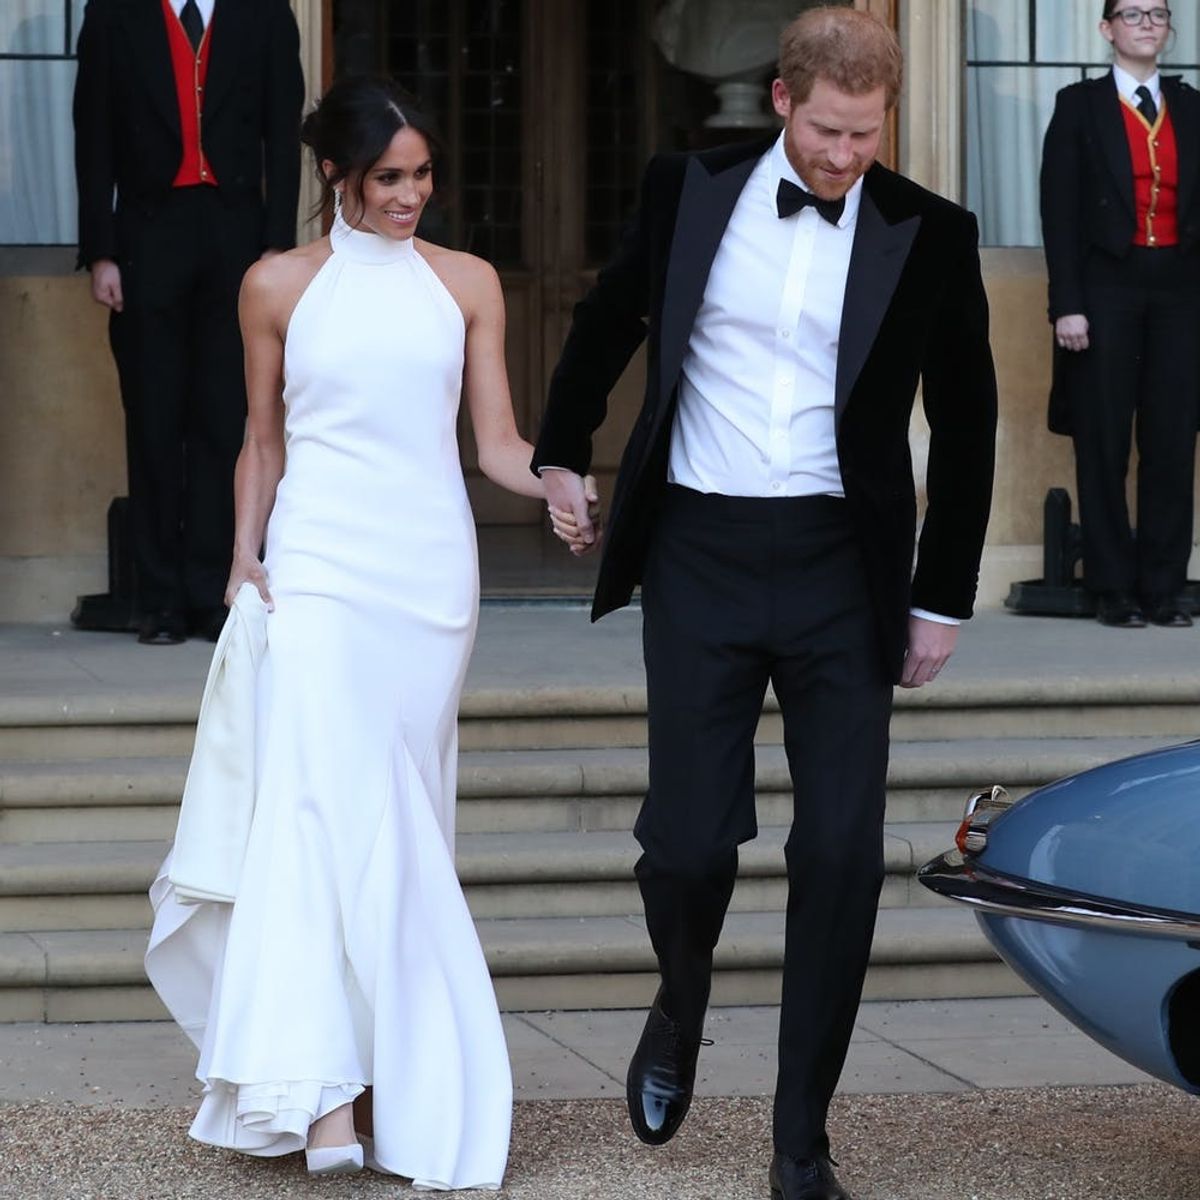 Everything We’ve Heard About the Royal Wedding Reception